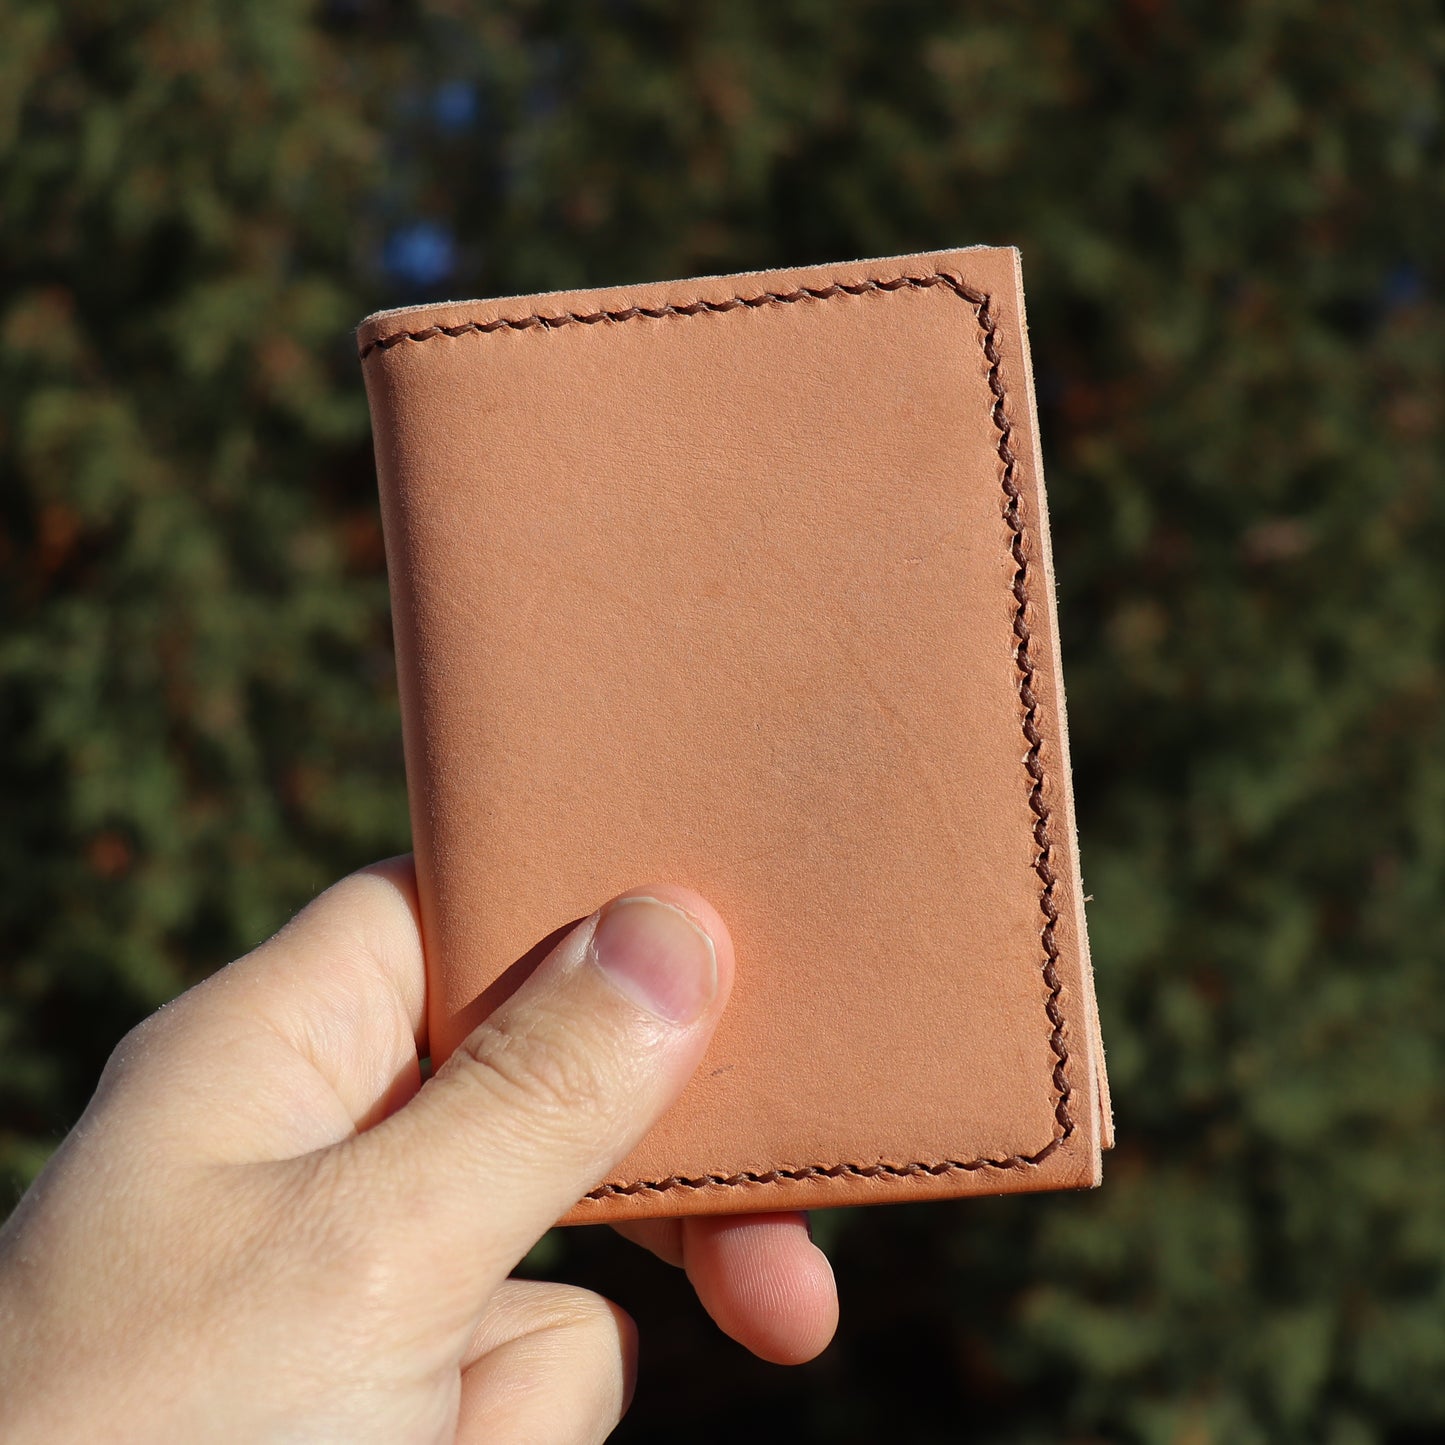 Made to Order Emerald Green and Natural Vegetable Tanned Italian Leather Minimalist Card Wallet Front Pocket Holder Brown Thread Hand Made 7 Pocket /